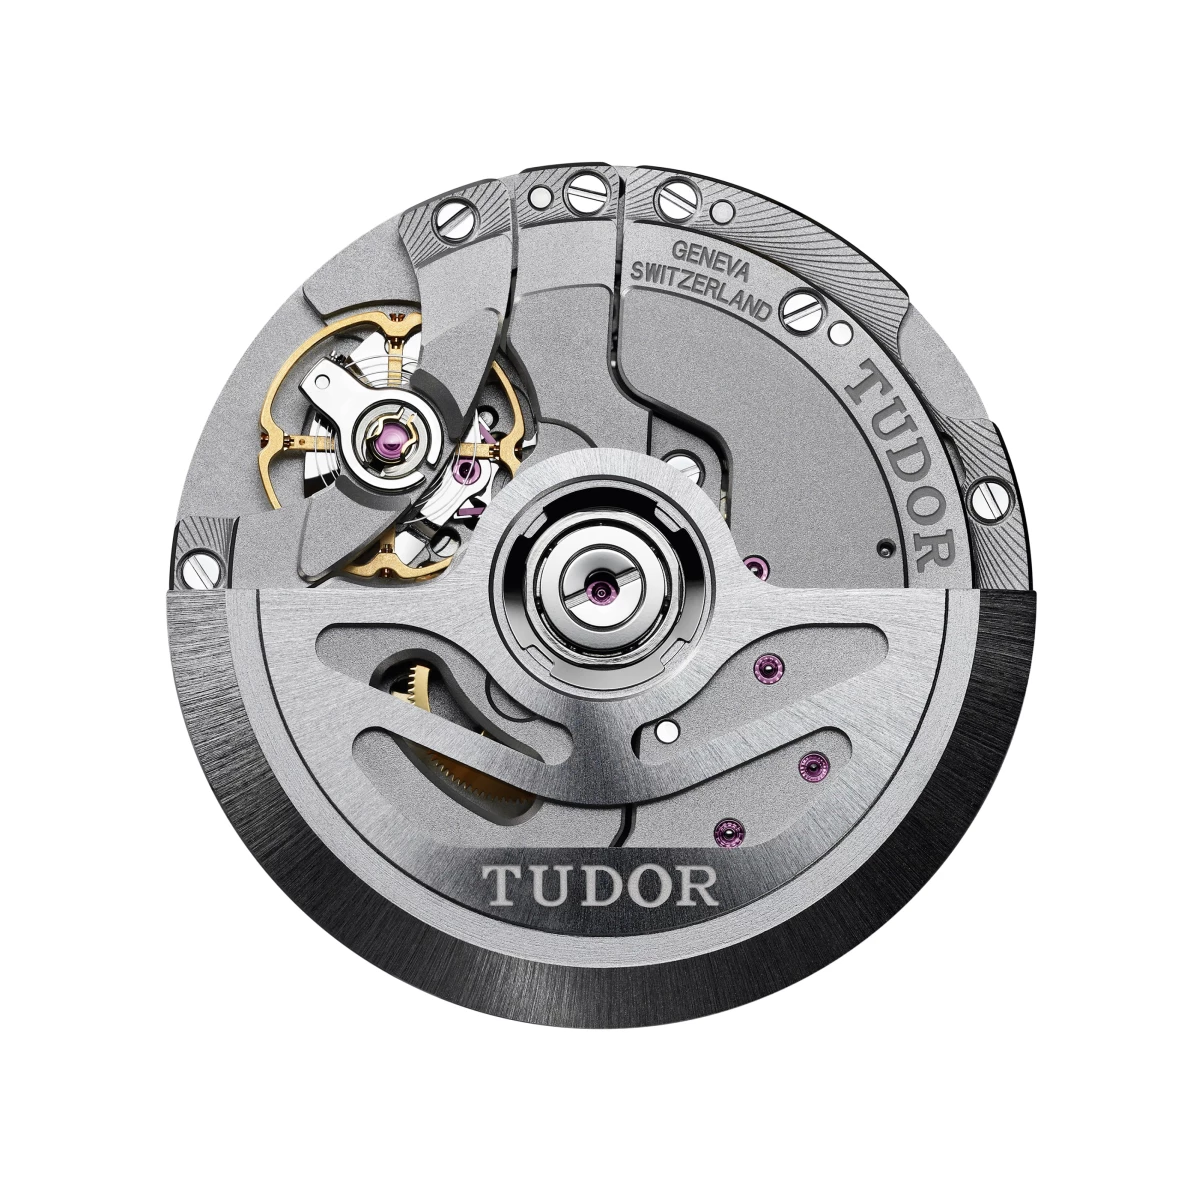 Tudor's take on an iconic function. The Tudor Black Bay GMT. 41 mm steel case, Manufacture calibre.